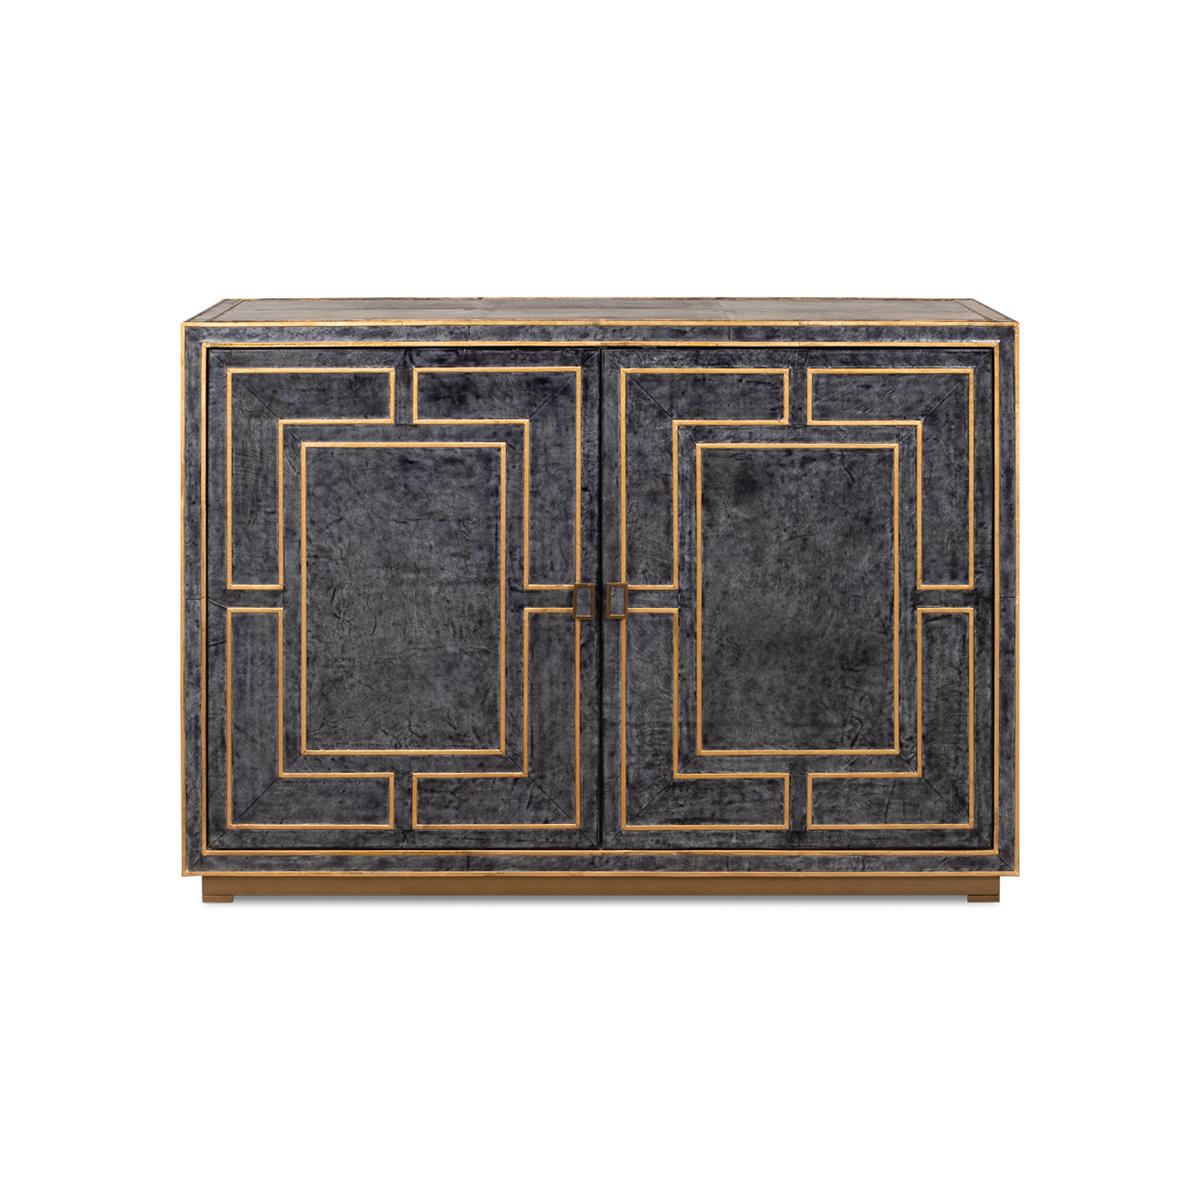 Modern leather cabinet, the two-door cabinet with gold piping in a geometric design, with a natural wood interior raised on a squared base.

Dimensions: 53